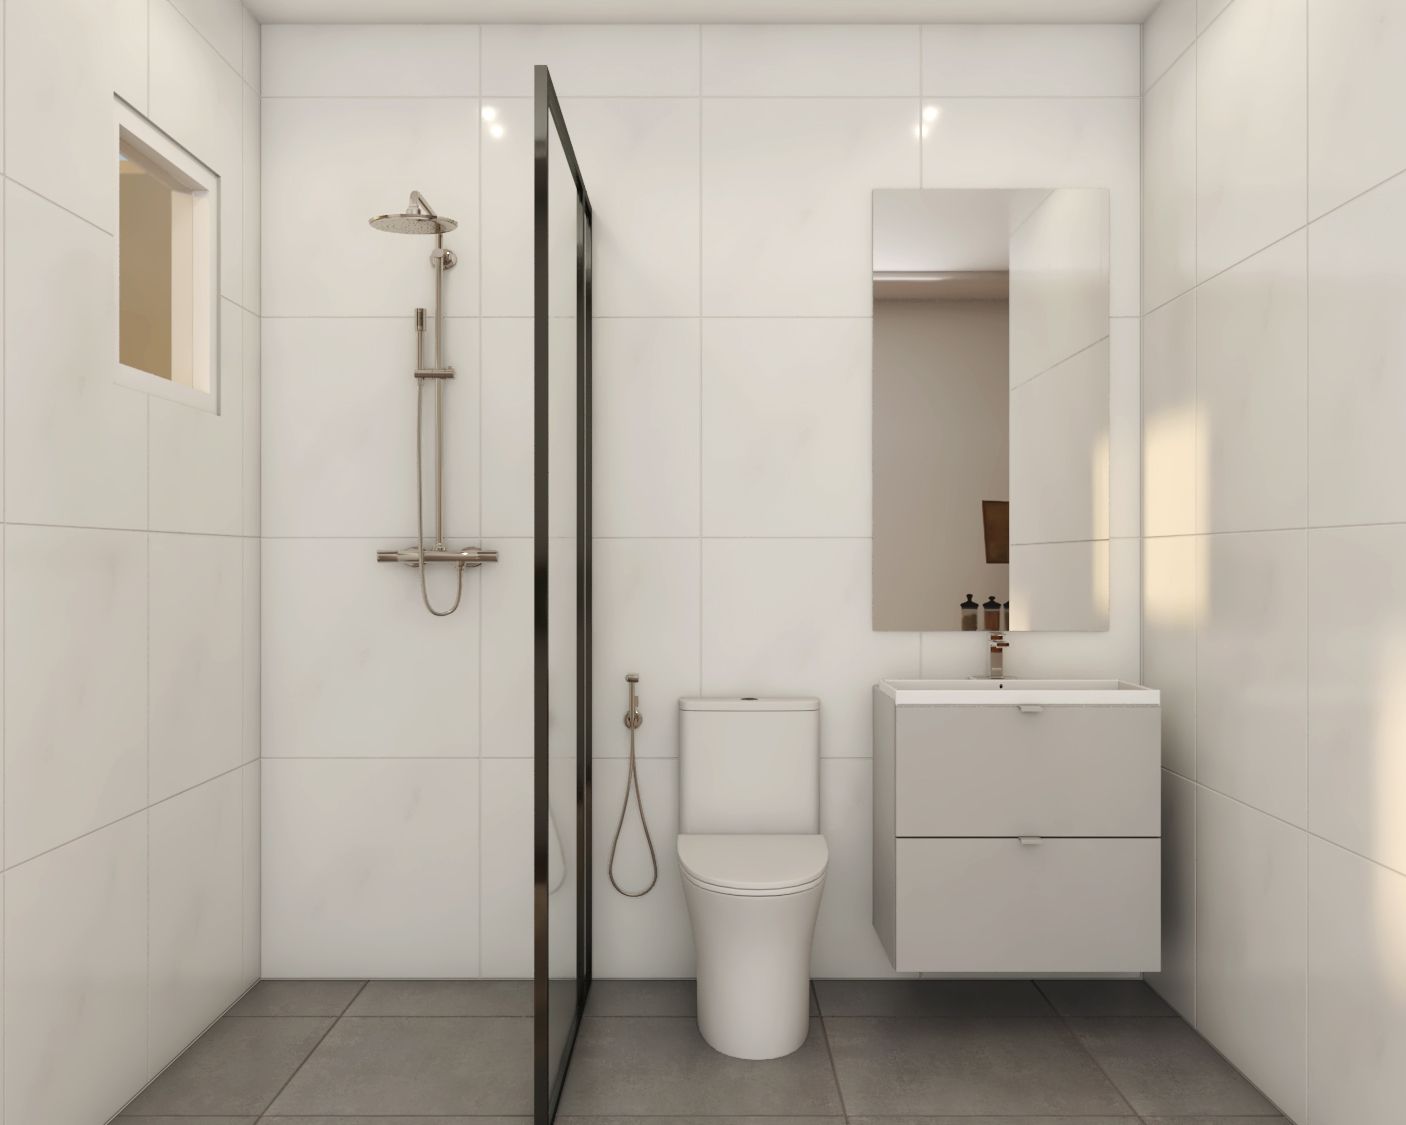 Compact White Bathroom Design For Rental Spaces